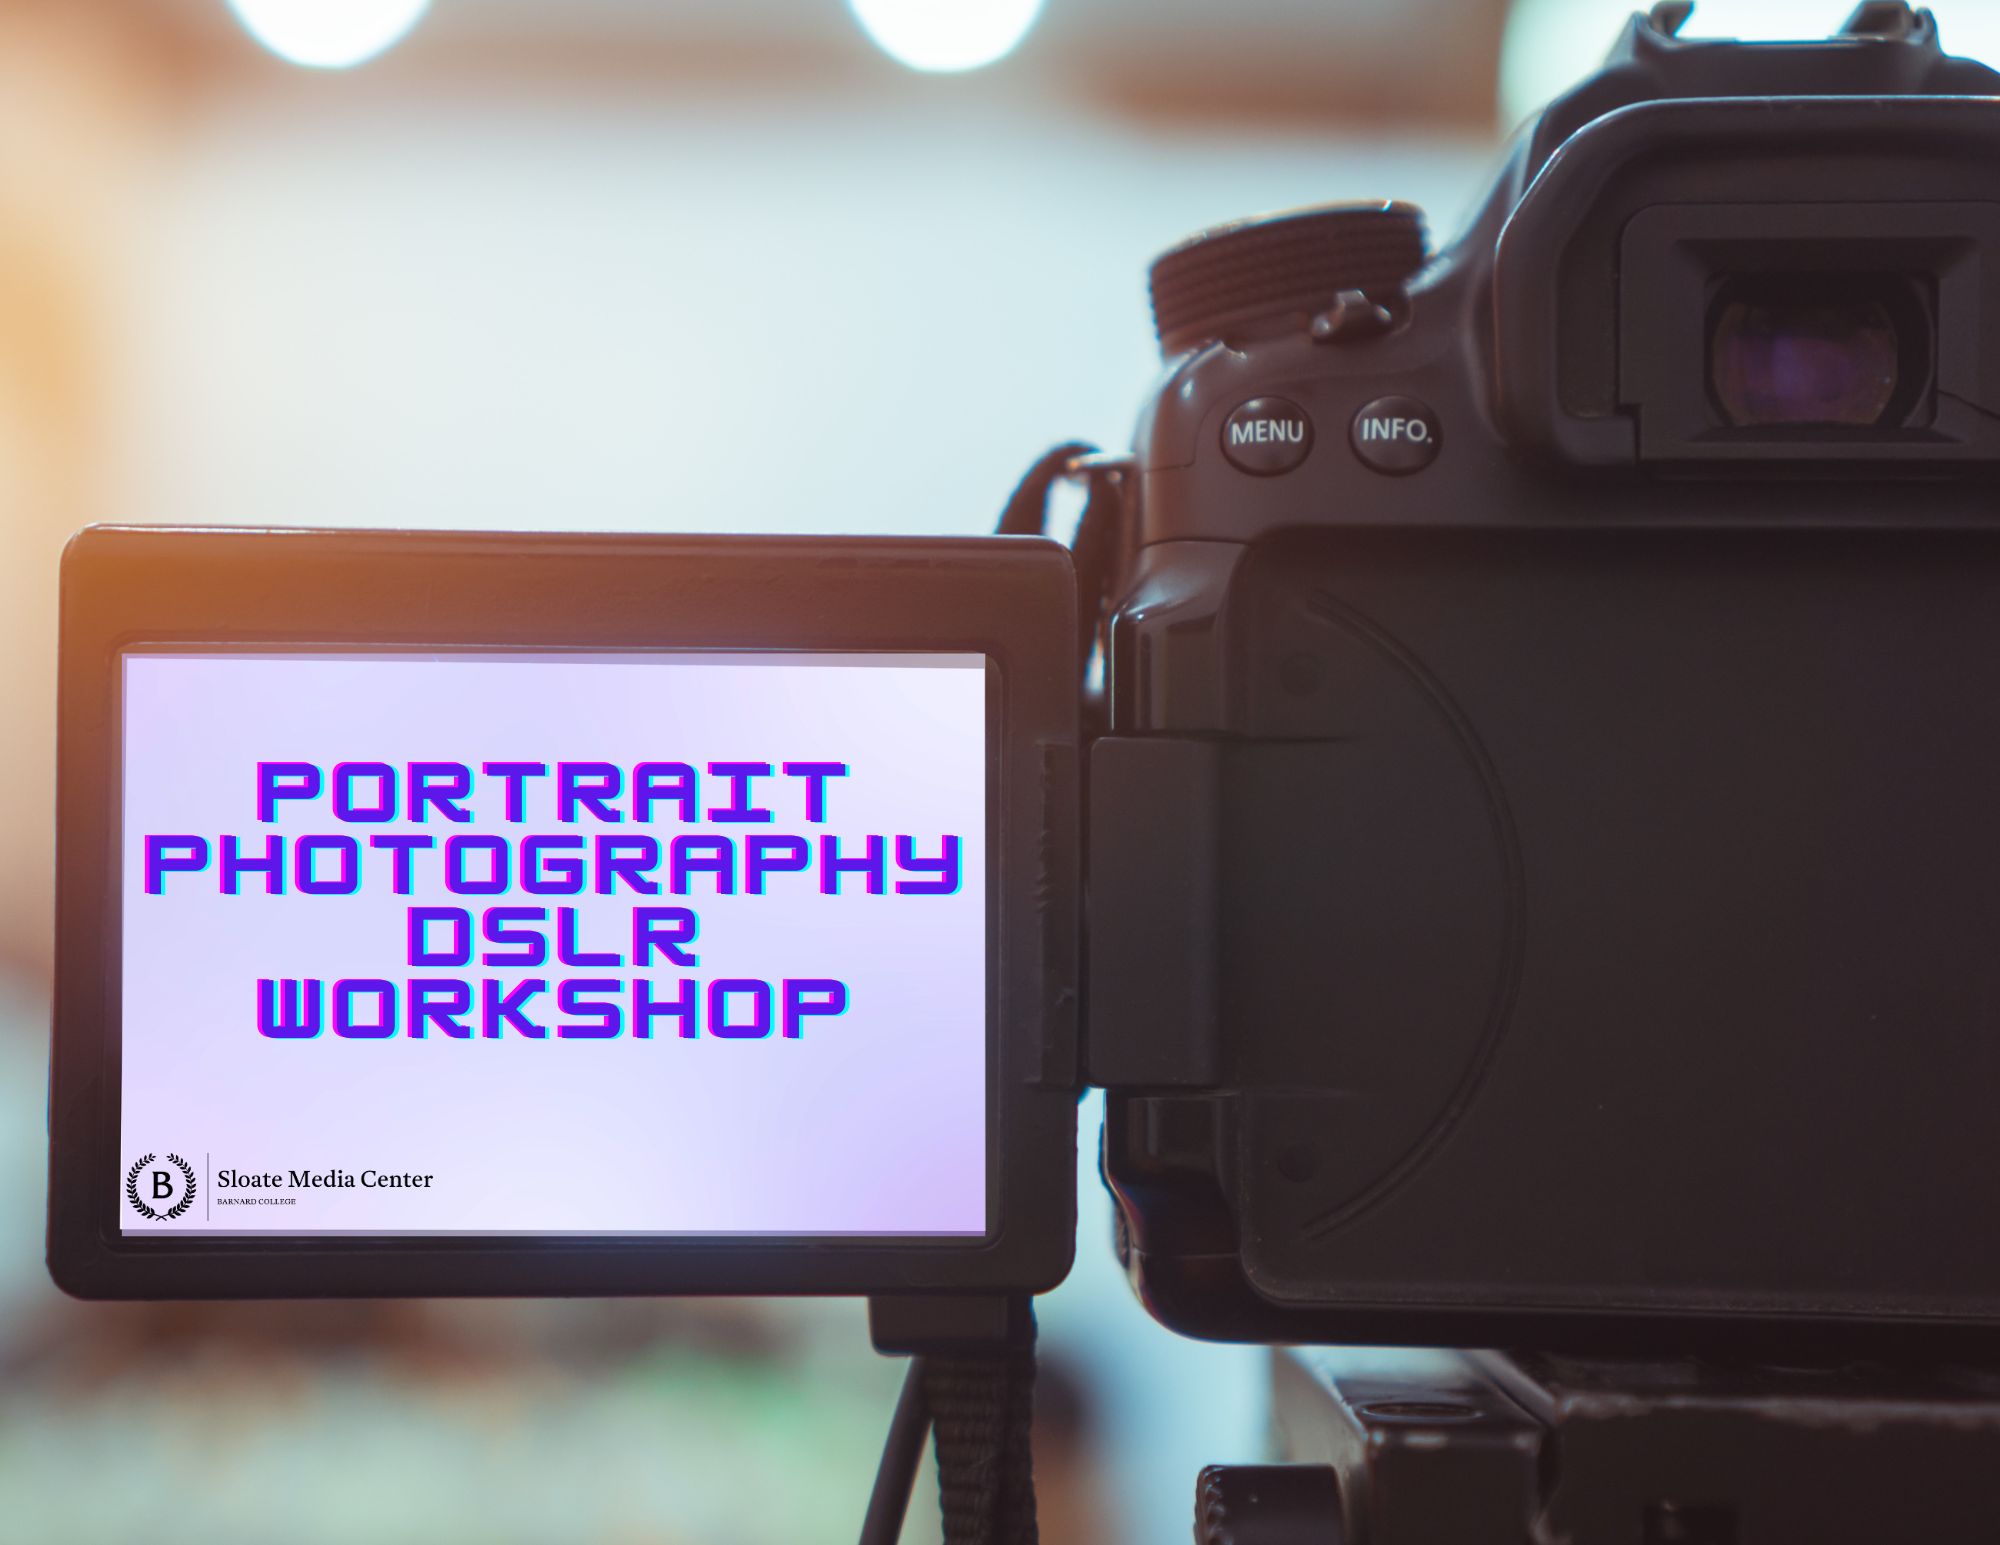 Photo of a DSLR with the LCD screen pulled out that says "Portrait Photography DSLR Workshop" and has the Sloate Media Center logo in the bottom left corner of the LCD screen.